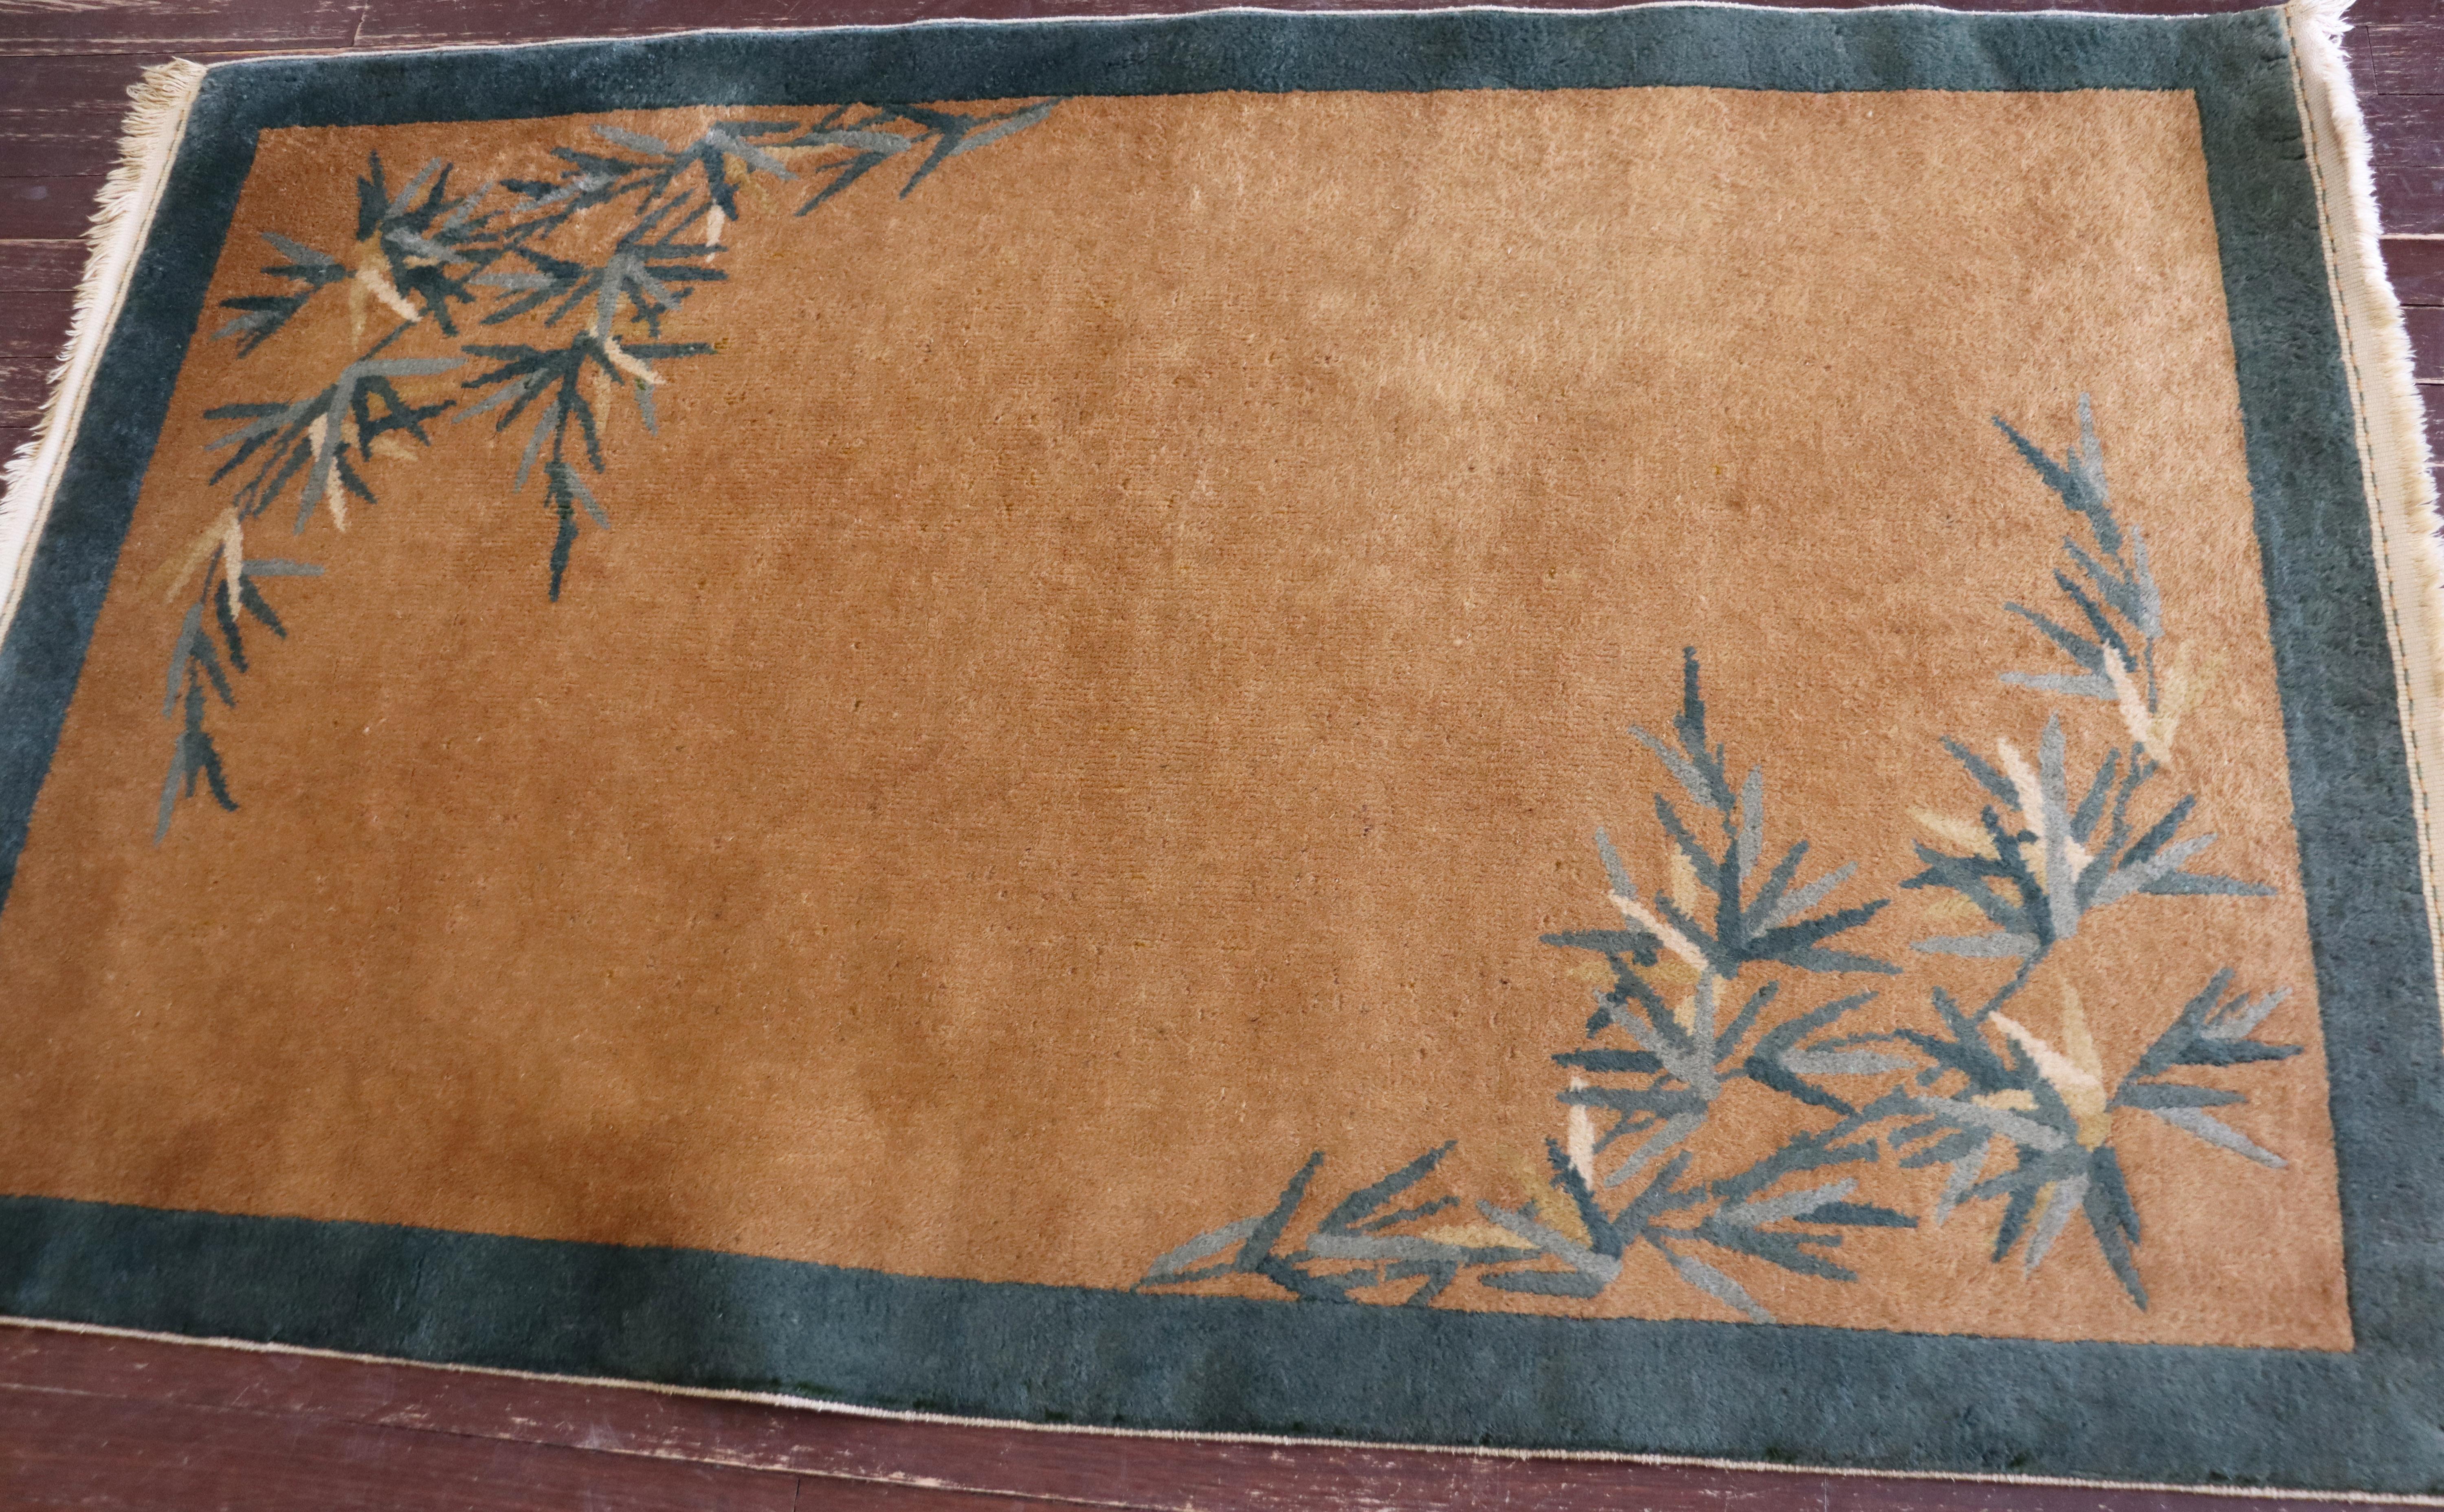 Antique Art Deco rug, bamboo tree.
This rug is in good condition, cleaned and no stained, the ends and bindings of the rug are intact as original and there has not been any repairs. There are no tears, breaks or holes.
The materials are from